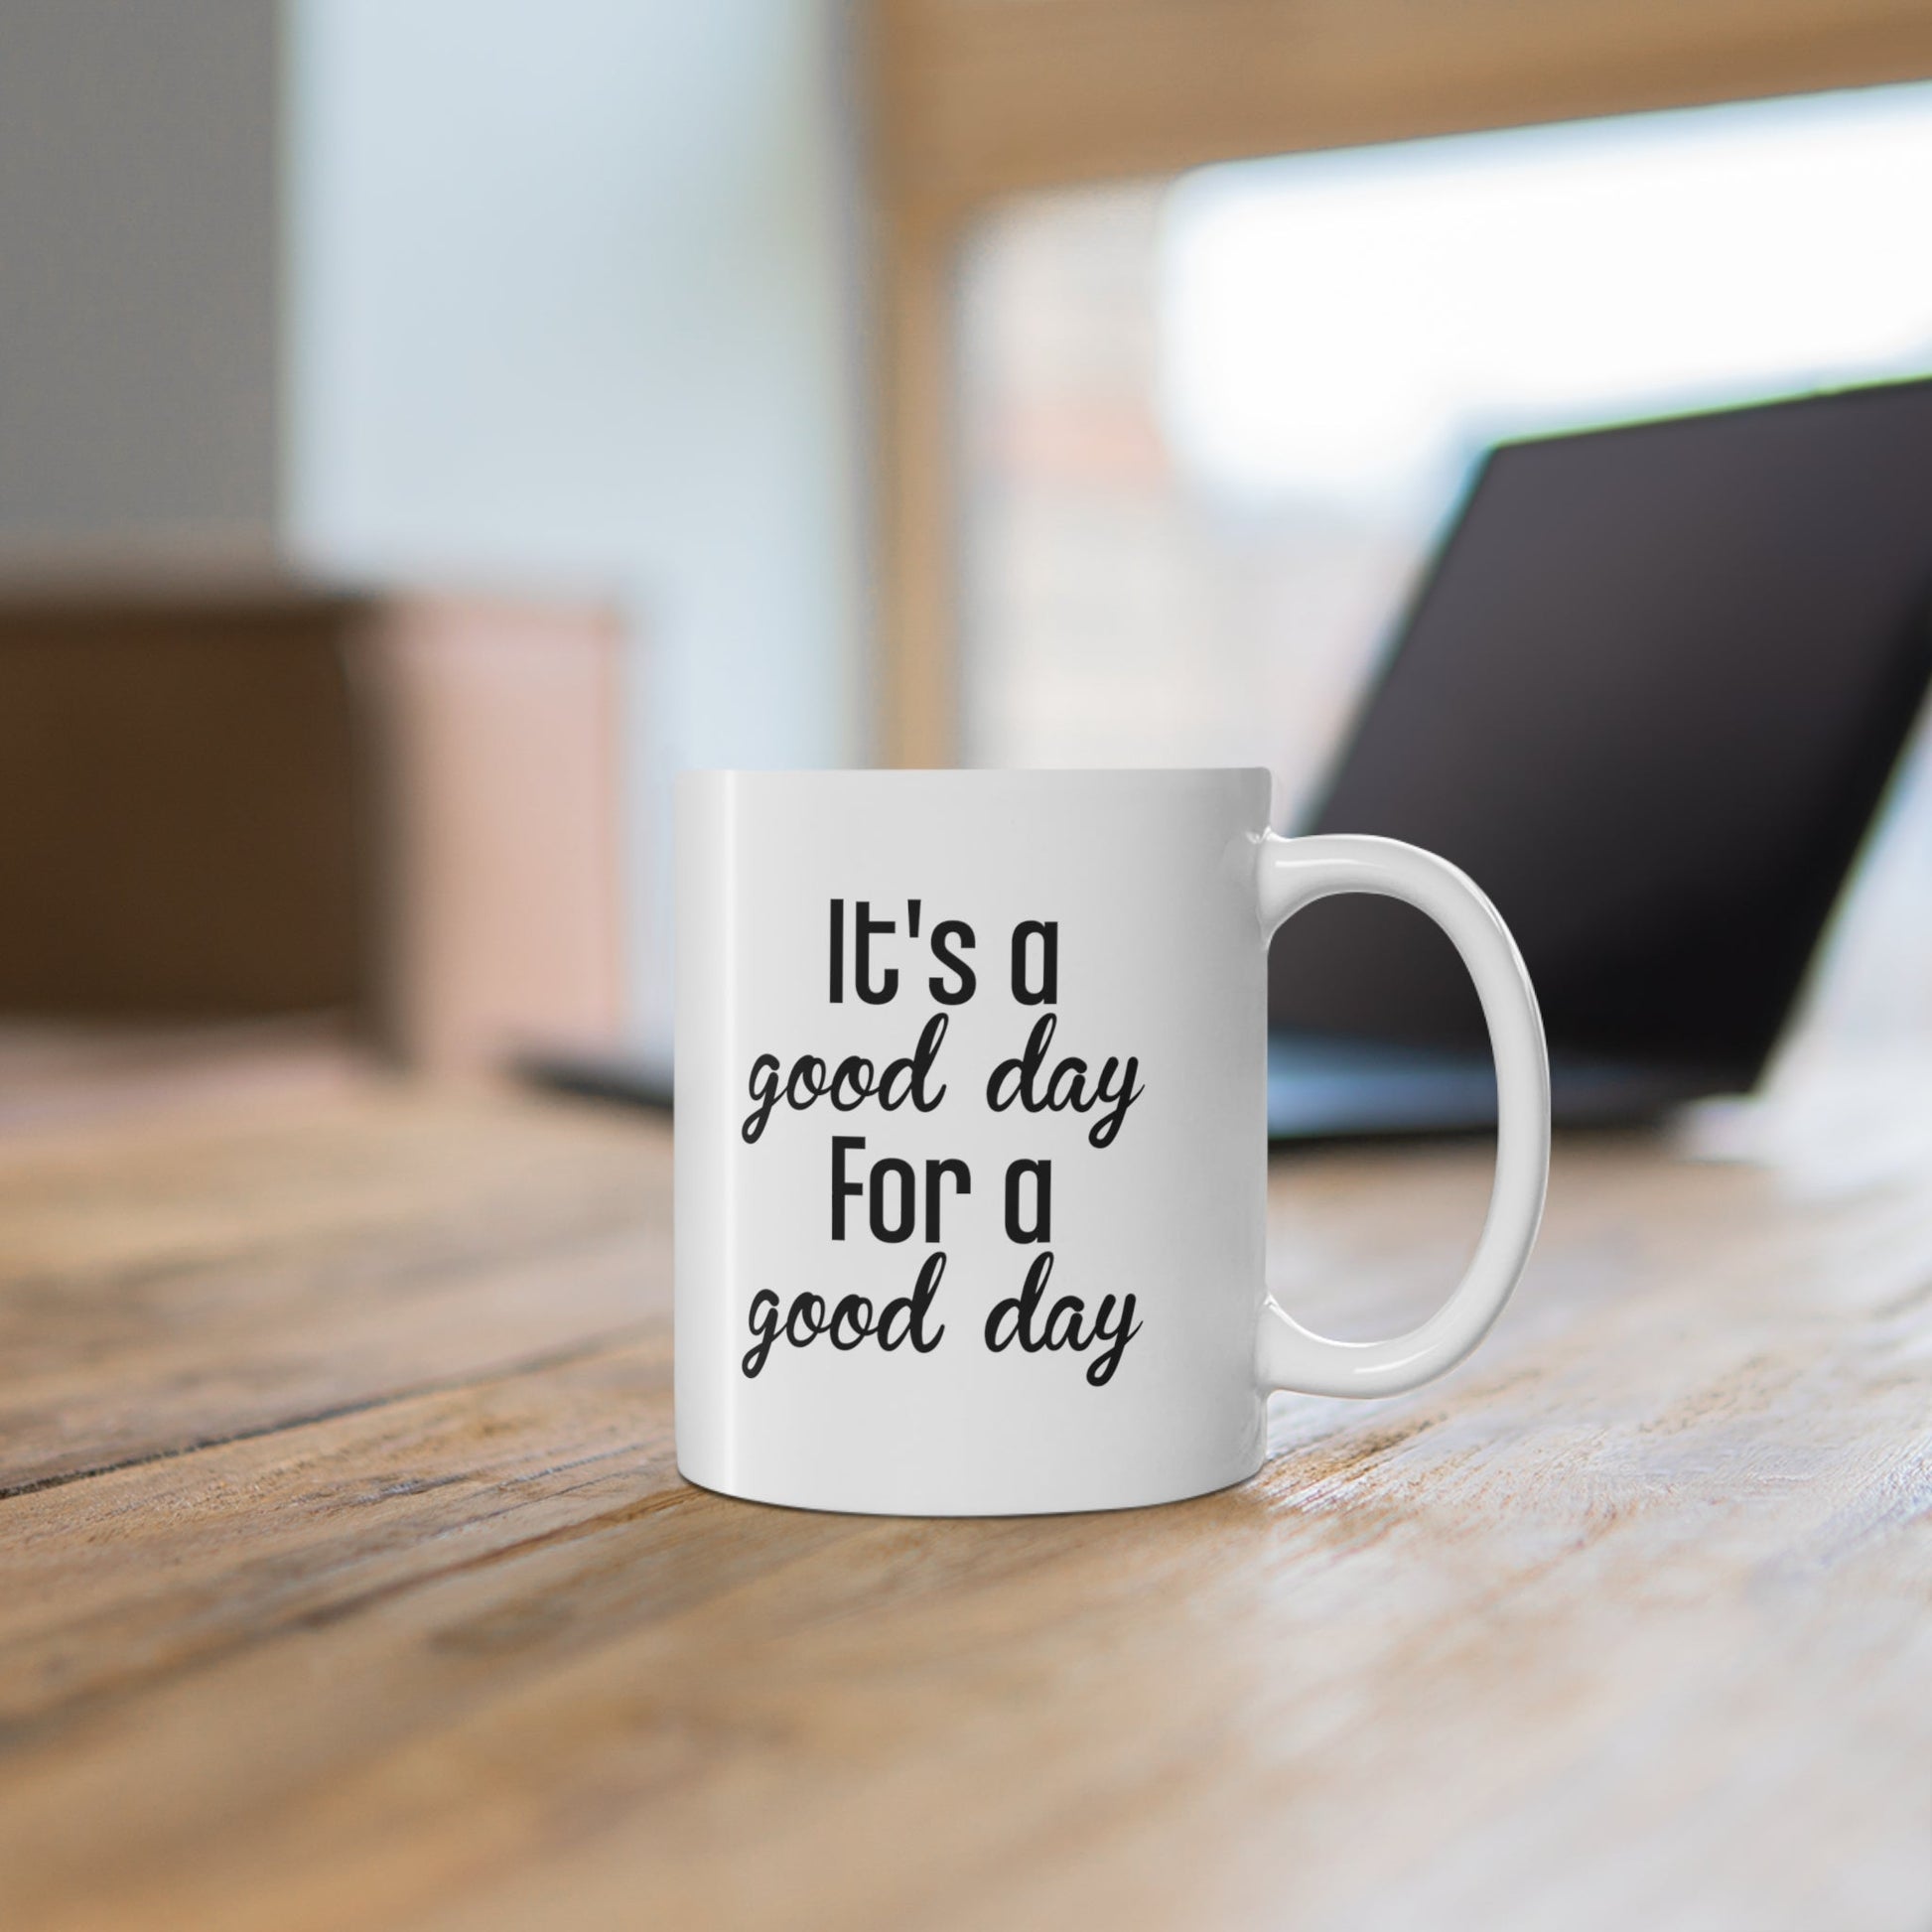 It's a Good Day for a Good Day Mug Coffee 11oz Jolly Mugs